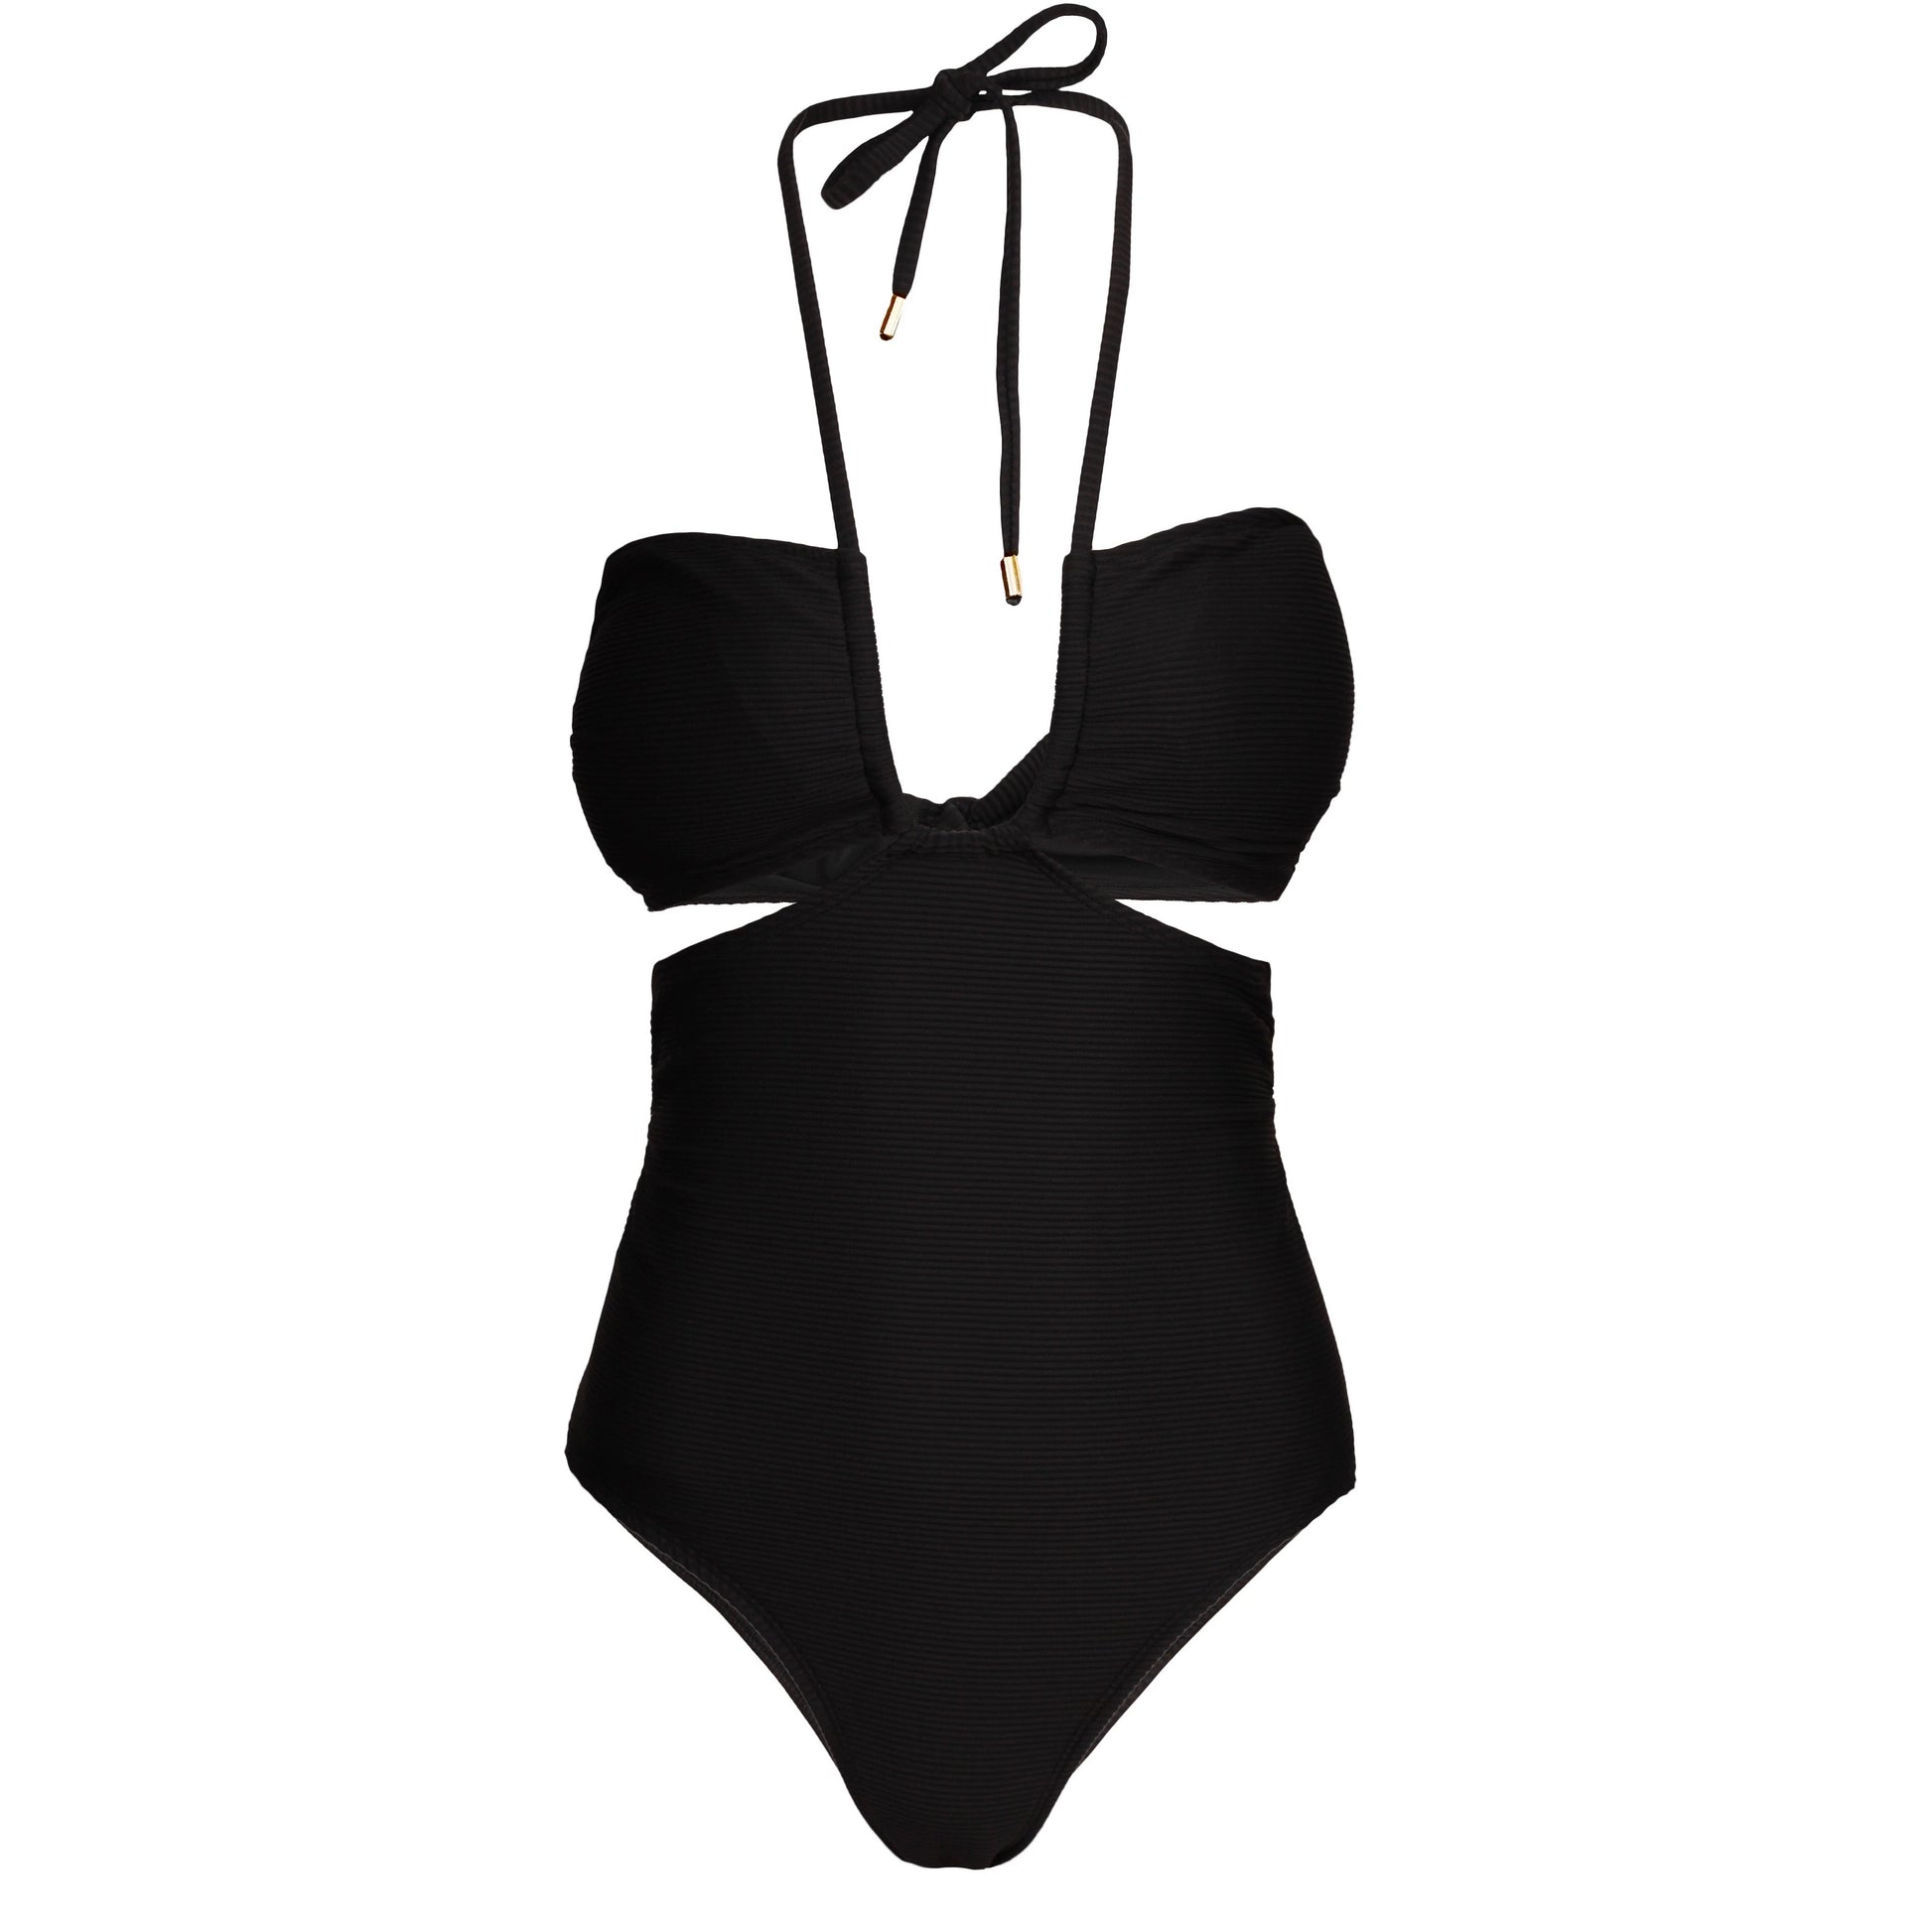 Black cut out style tie up versatile one piece 5 way swimsuit in ribbed fabric.